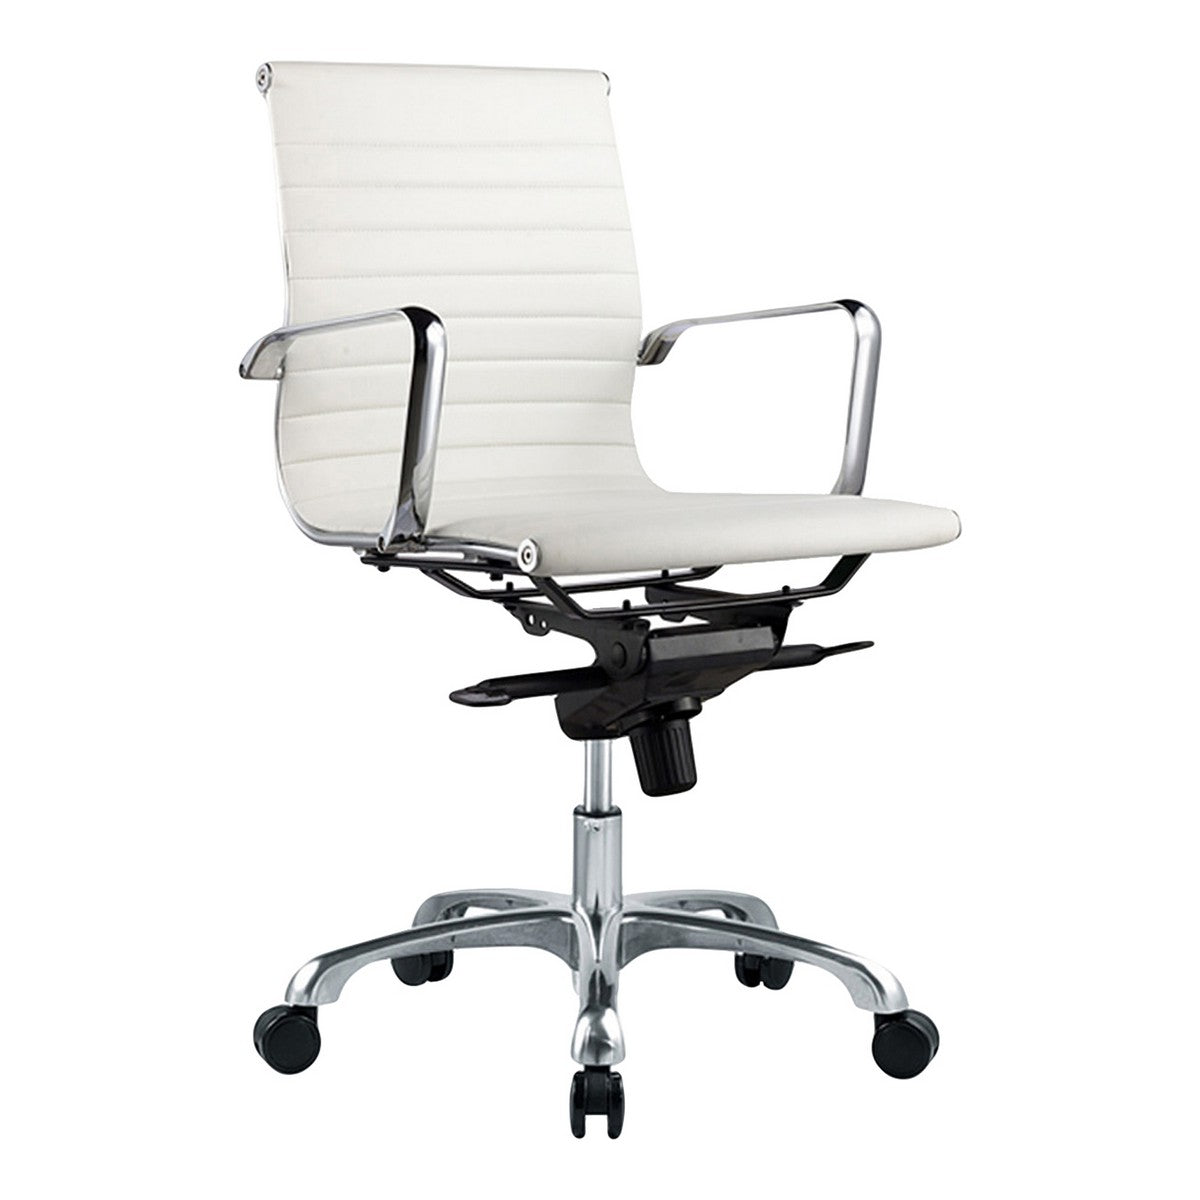 Moe's Home Collection Omega Swivel office Chair Low Back White - ZM-1002-18